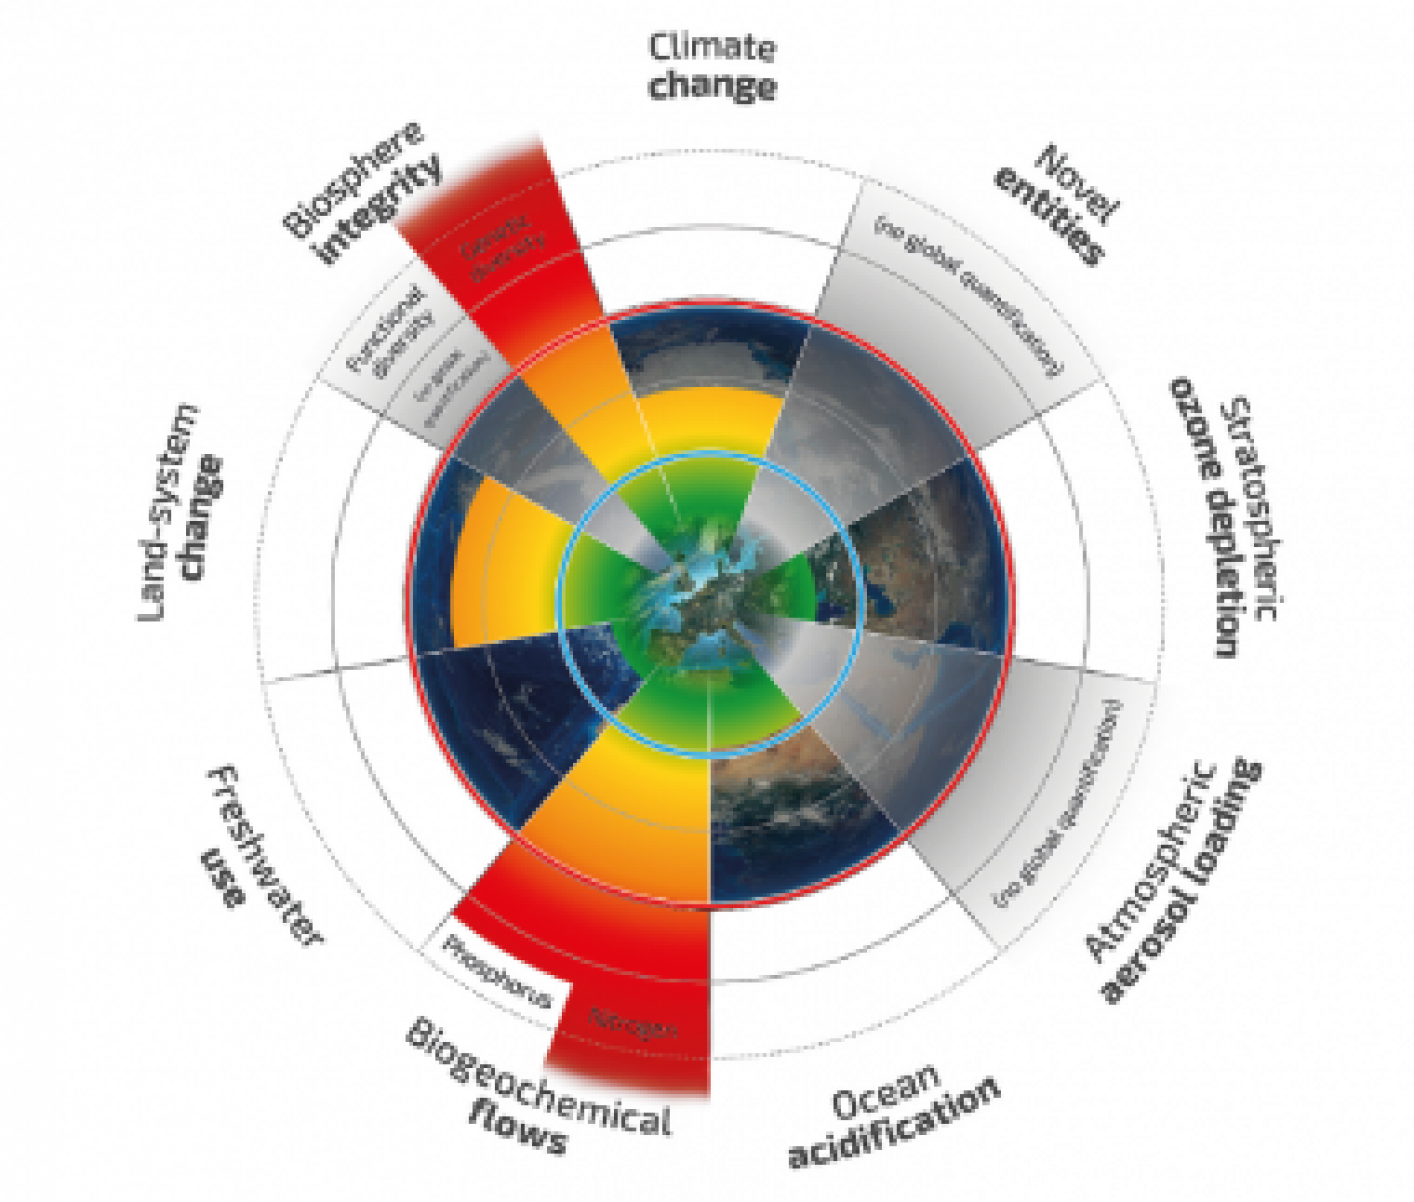 The illustration shows how nine planetary boundaries have changed from 1950 to present.